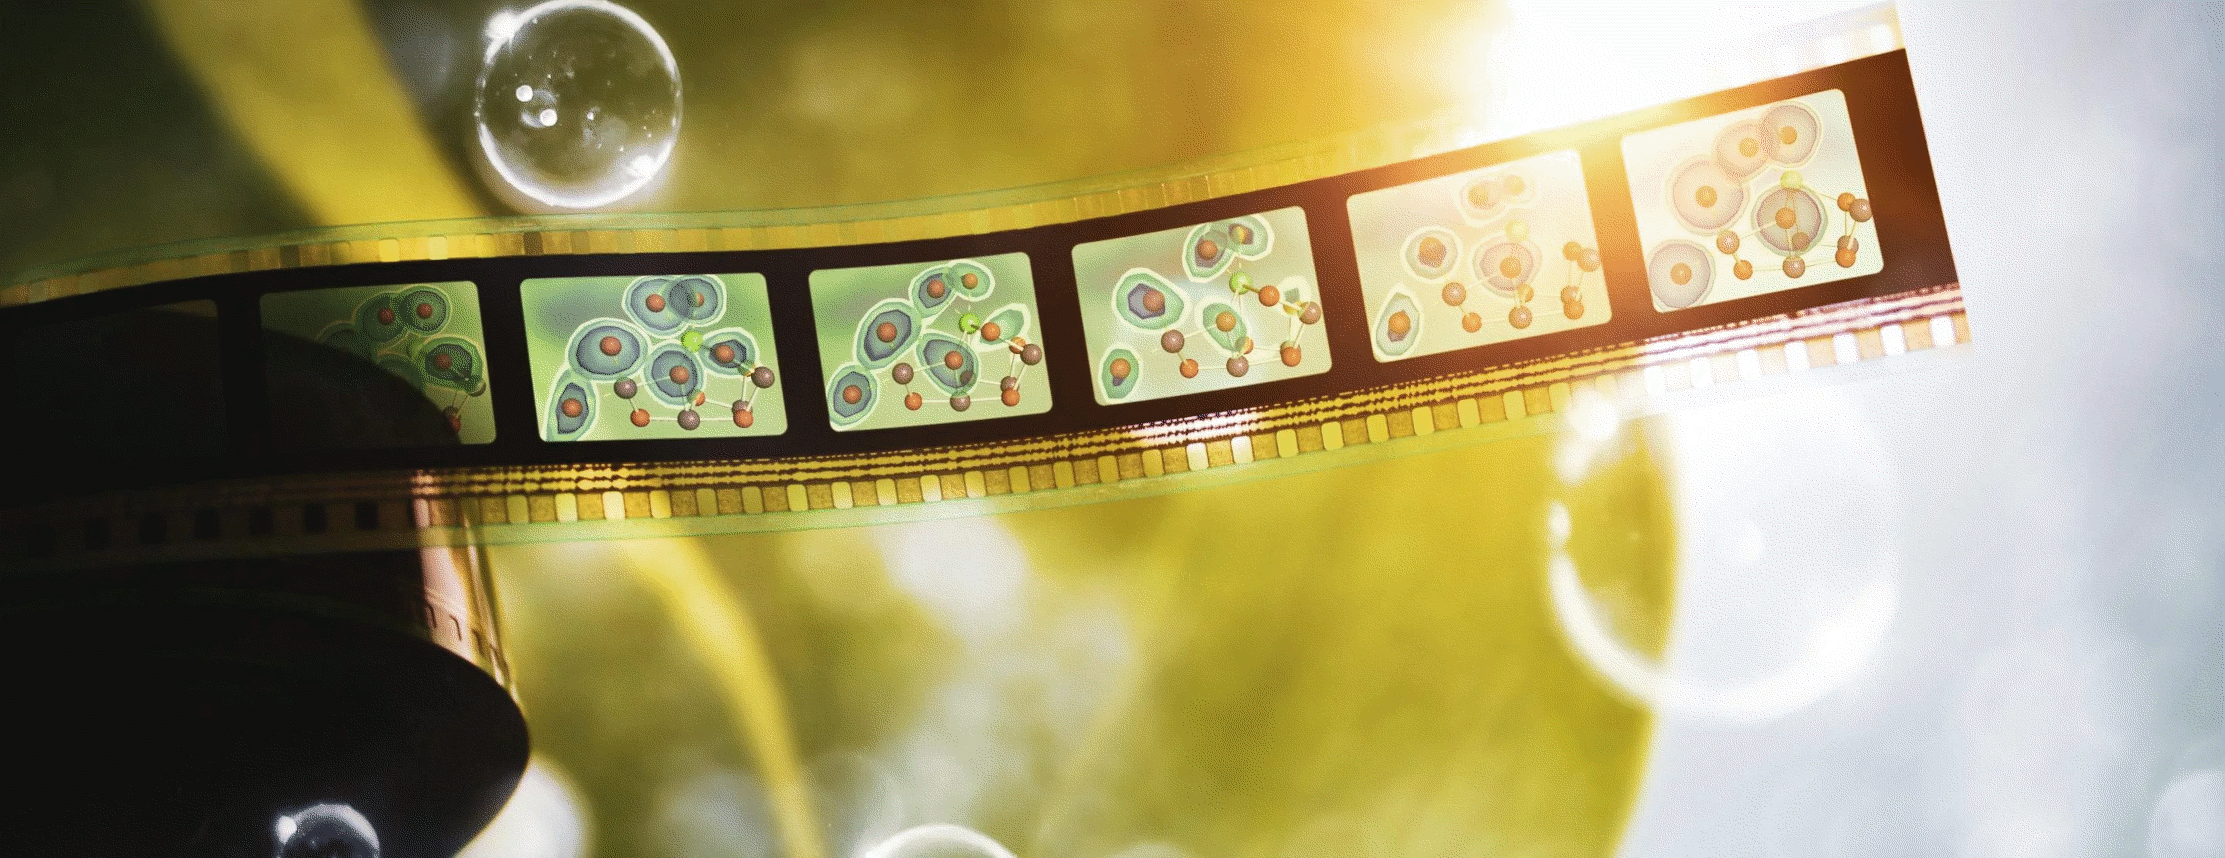 Roll of film showing several frames containing colorful abstract organic shapes reminiscent of cells